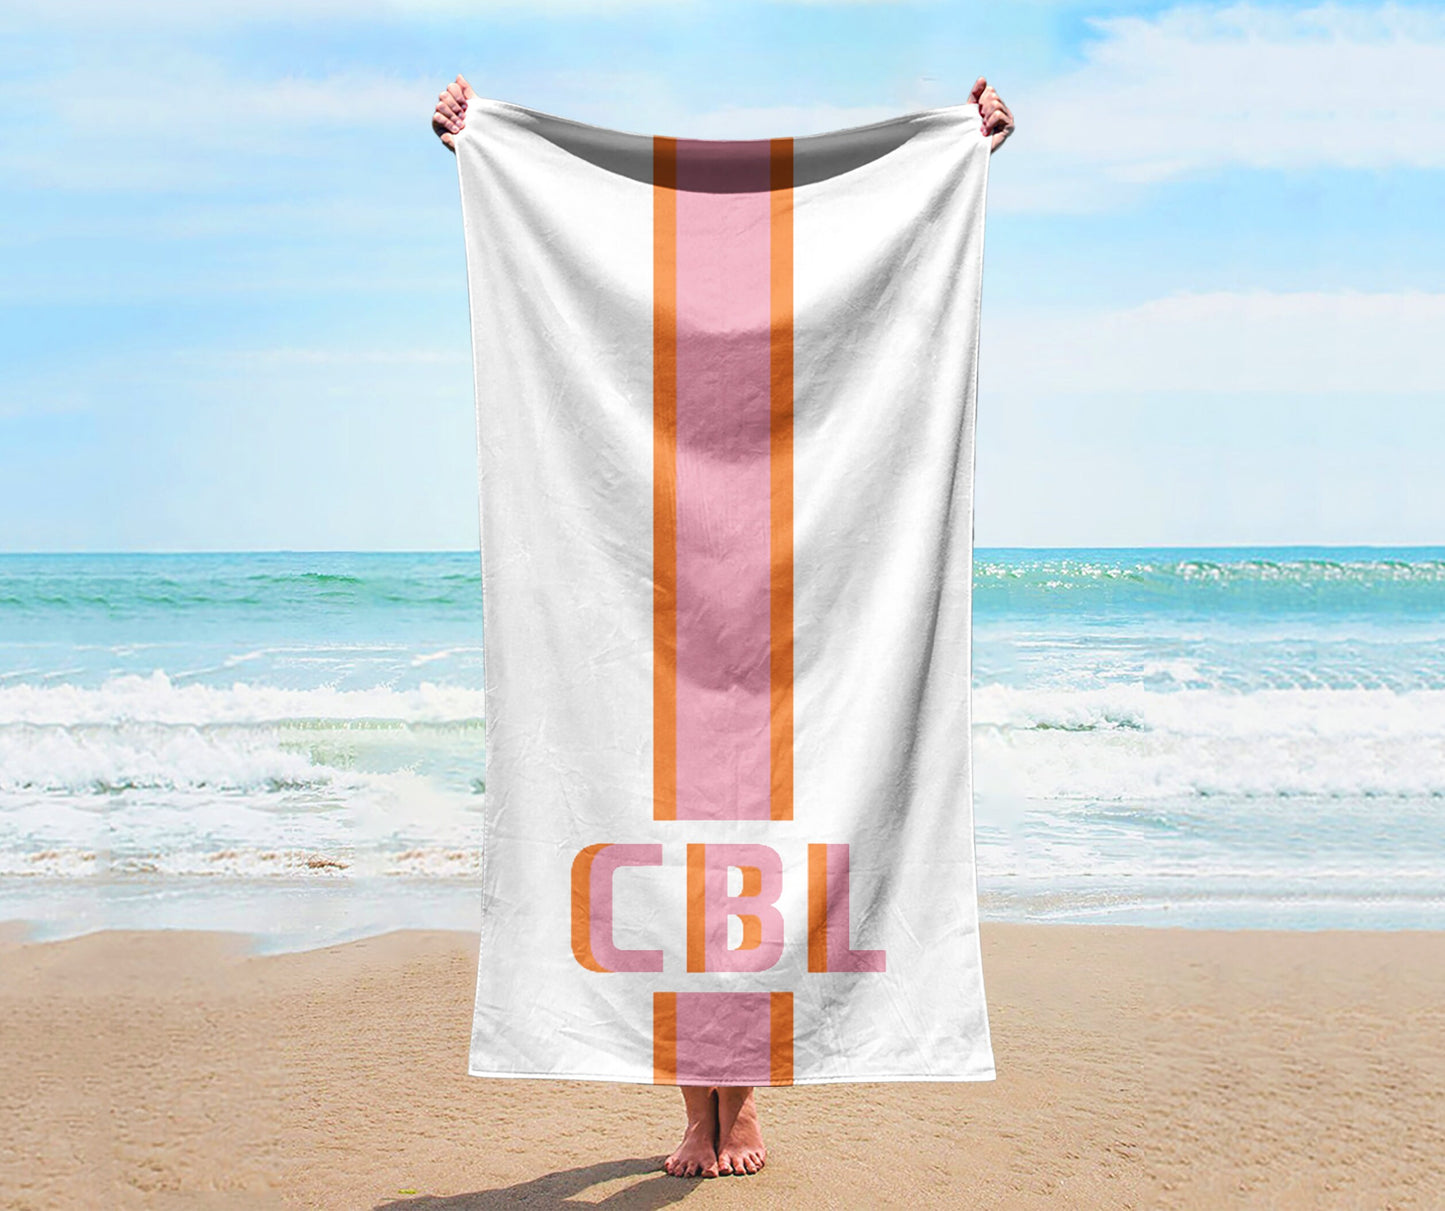 NEW Style Personalized Beach Towel Personalized Name Bath Towel Custom Pool Towel Beach Towel With Name Outside Birthday Vacation Gift